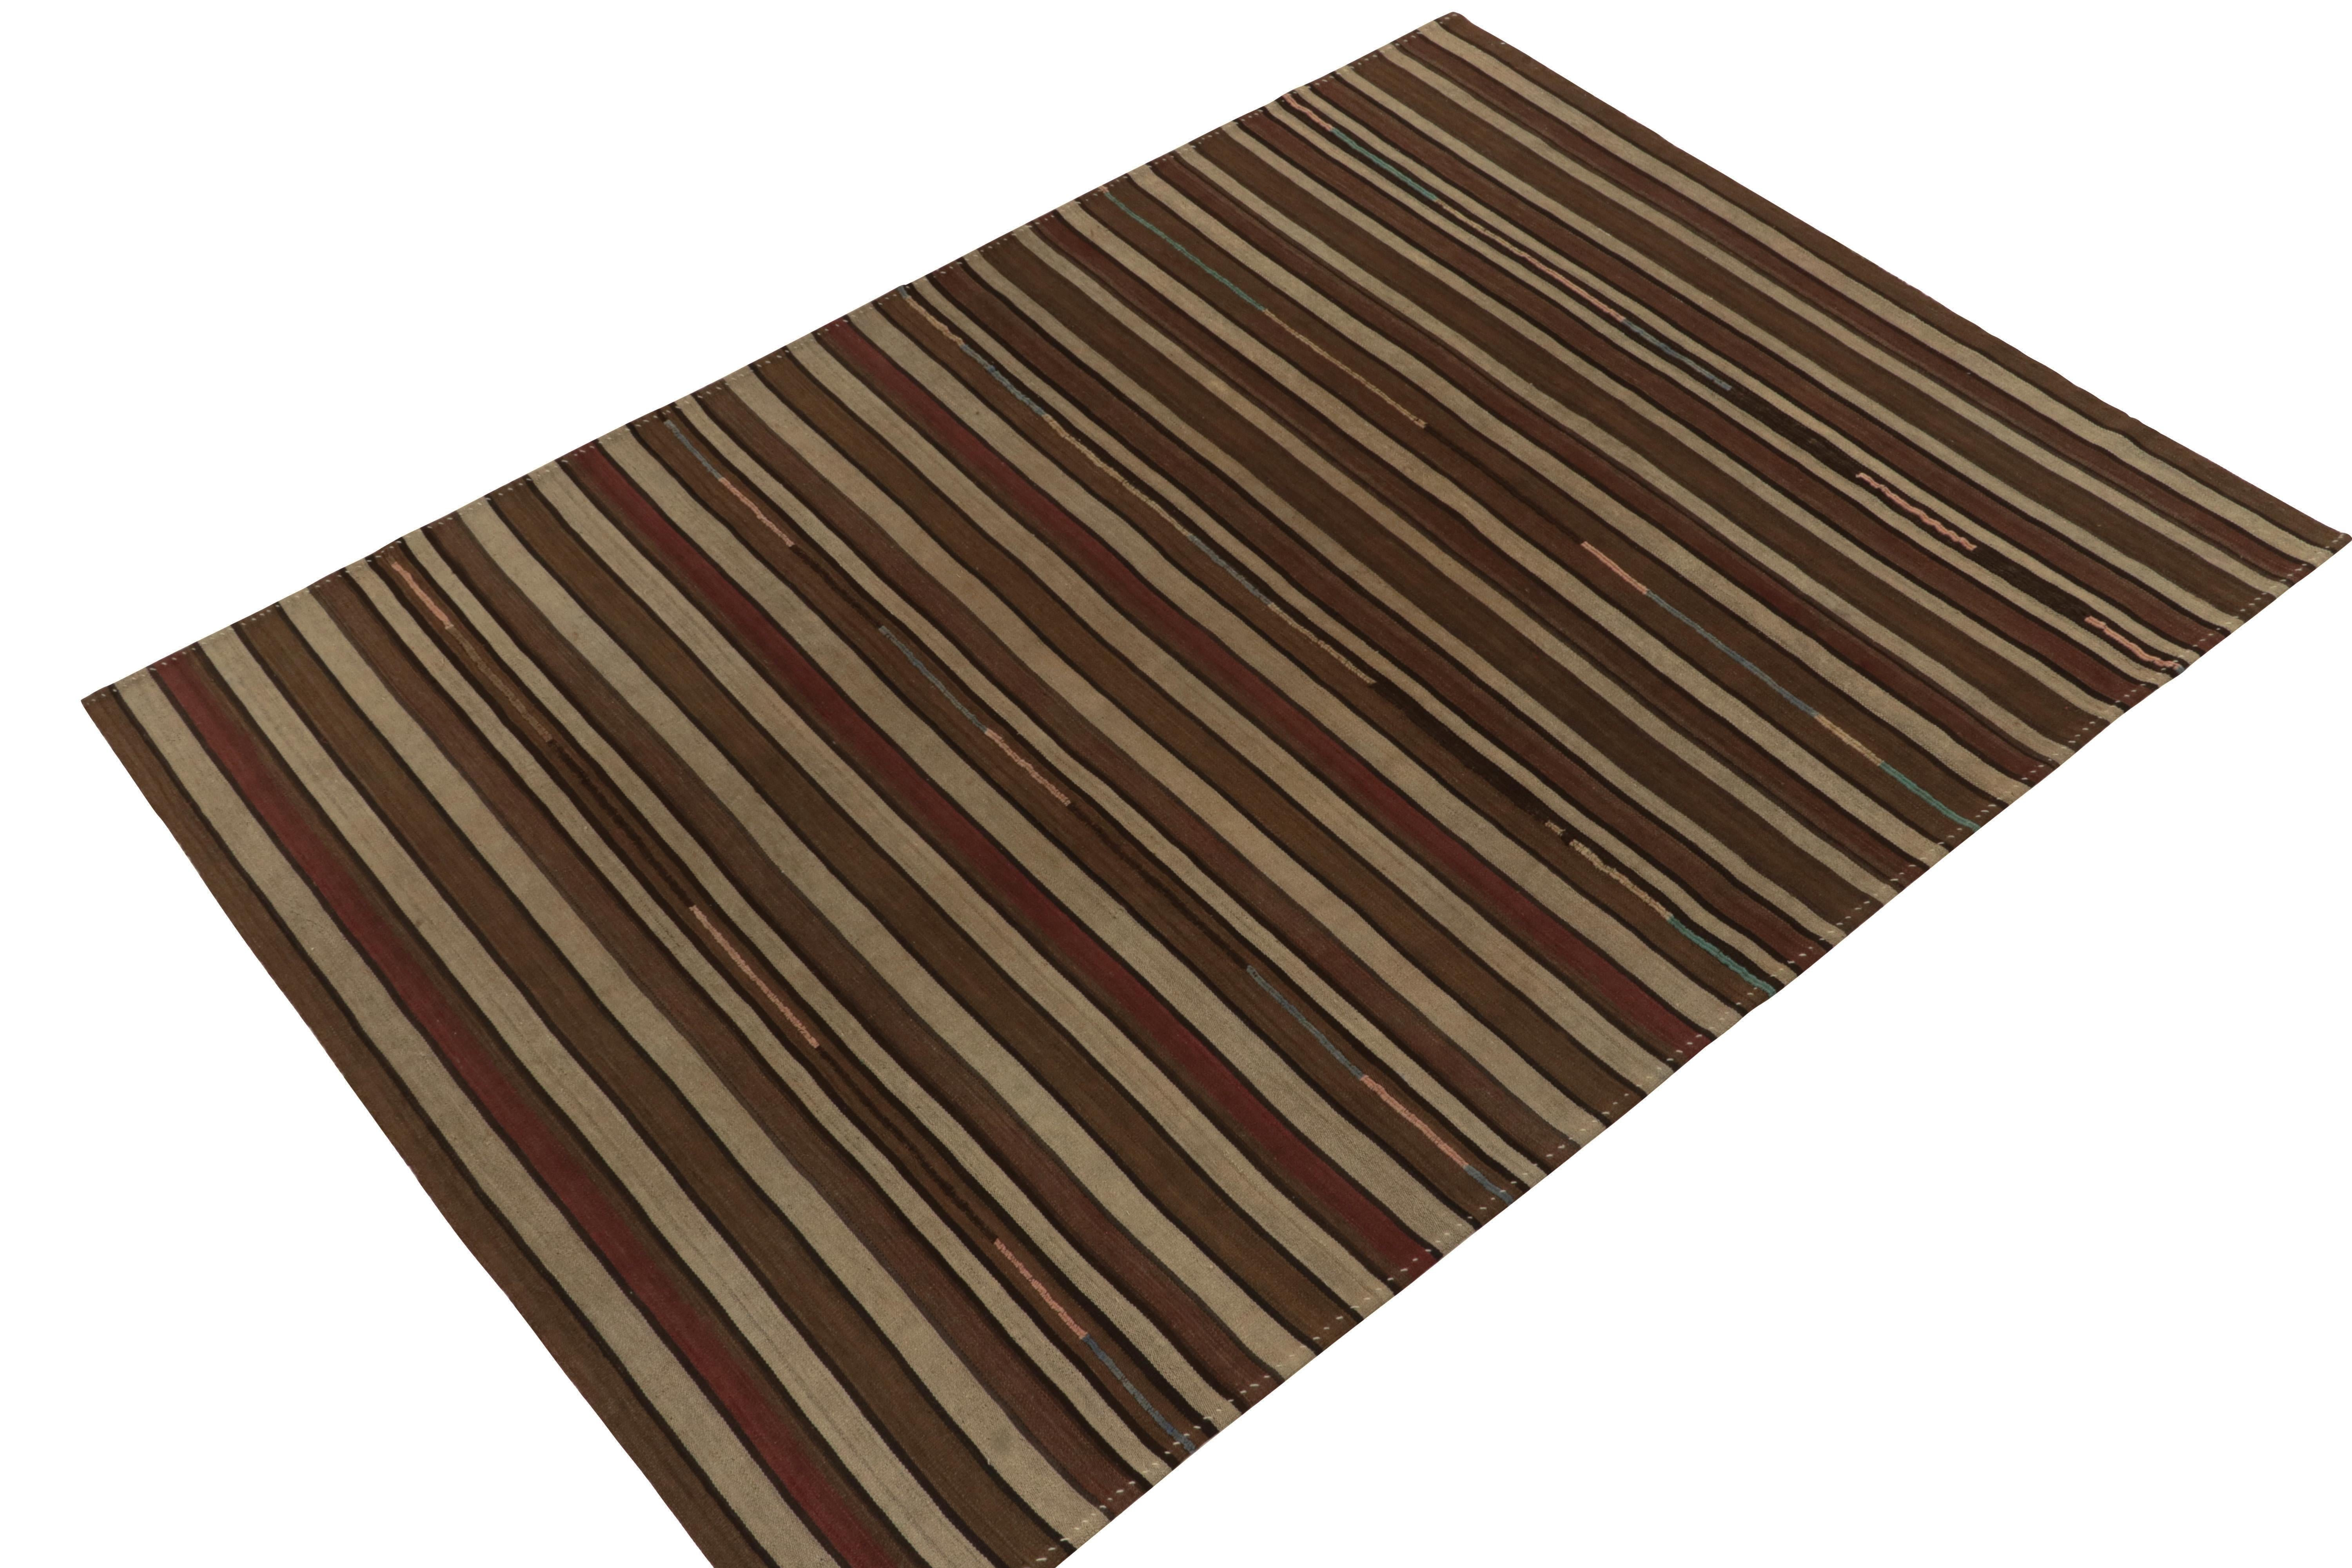 Originating from Turkey circa 1930-1940, a 7x9 antique Kilim carrying simple but subtly playful stripes. Enjoying beige-brown with deep red notes, the piece exemplifies the rustic & simplified approach of tribal aesthetics. Prevailing in good